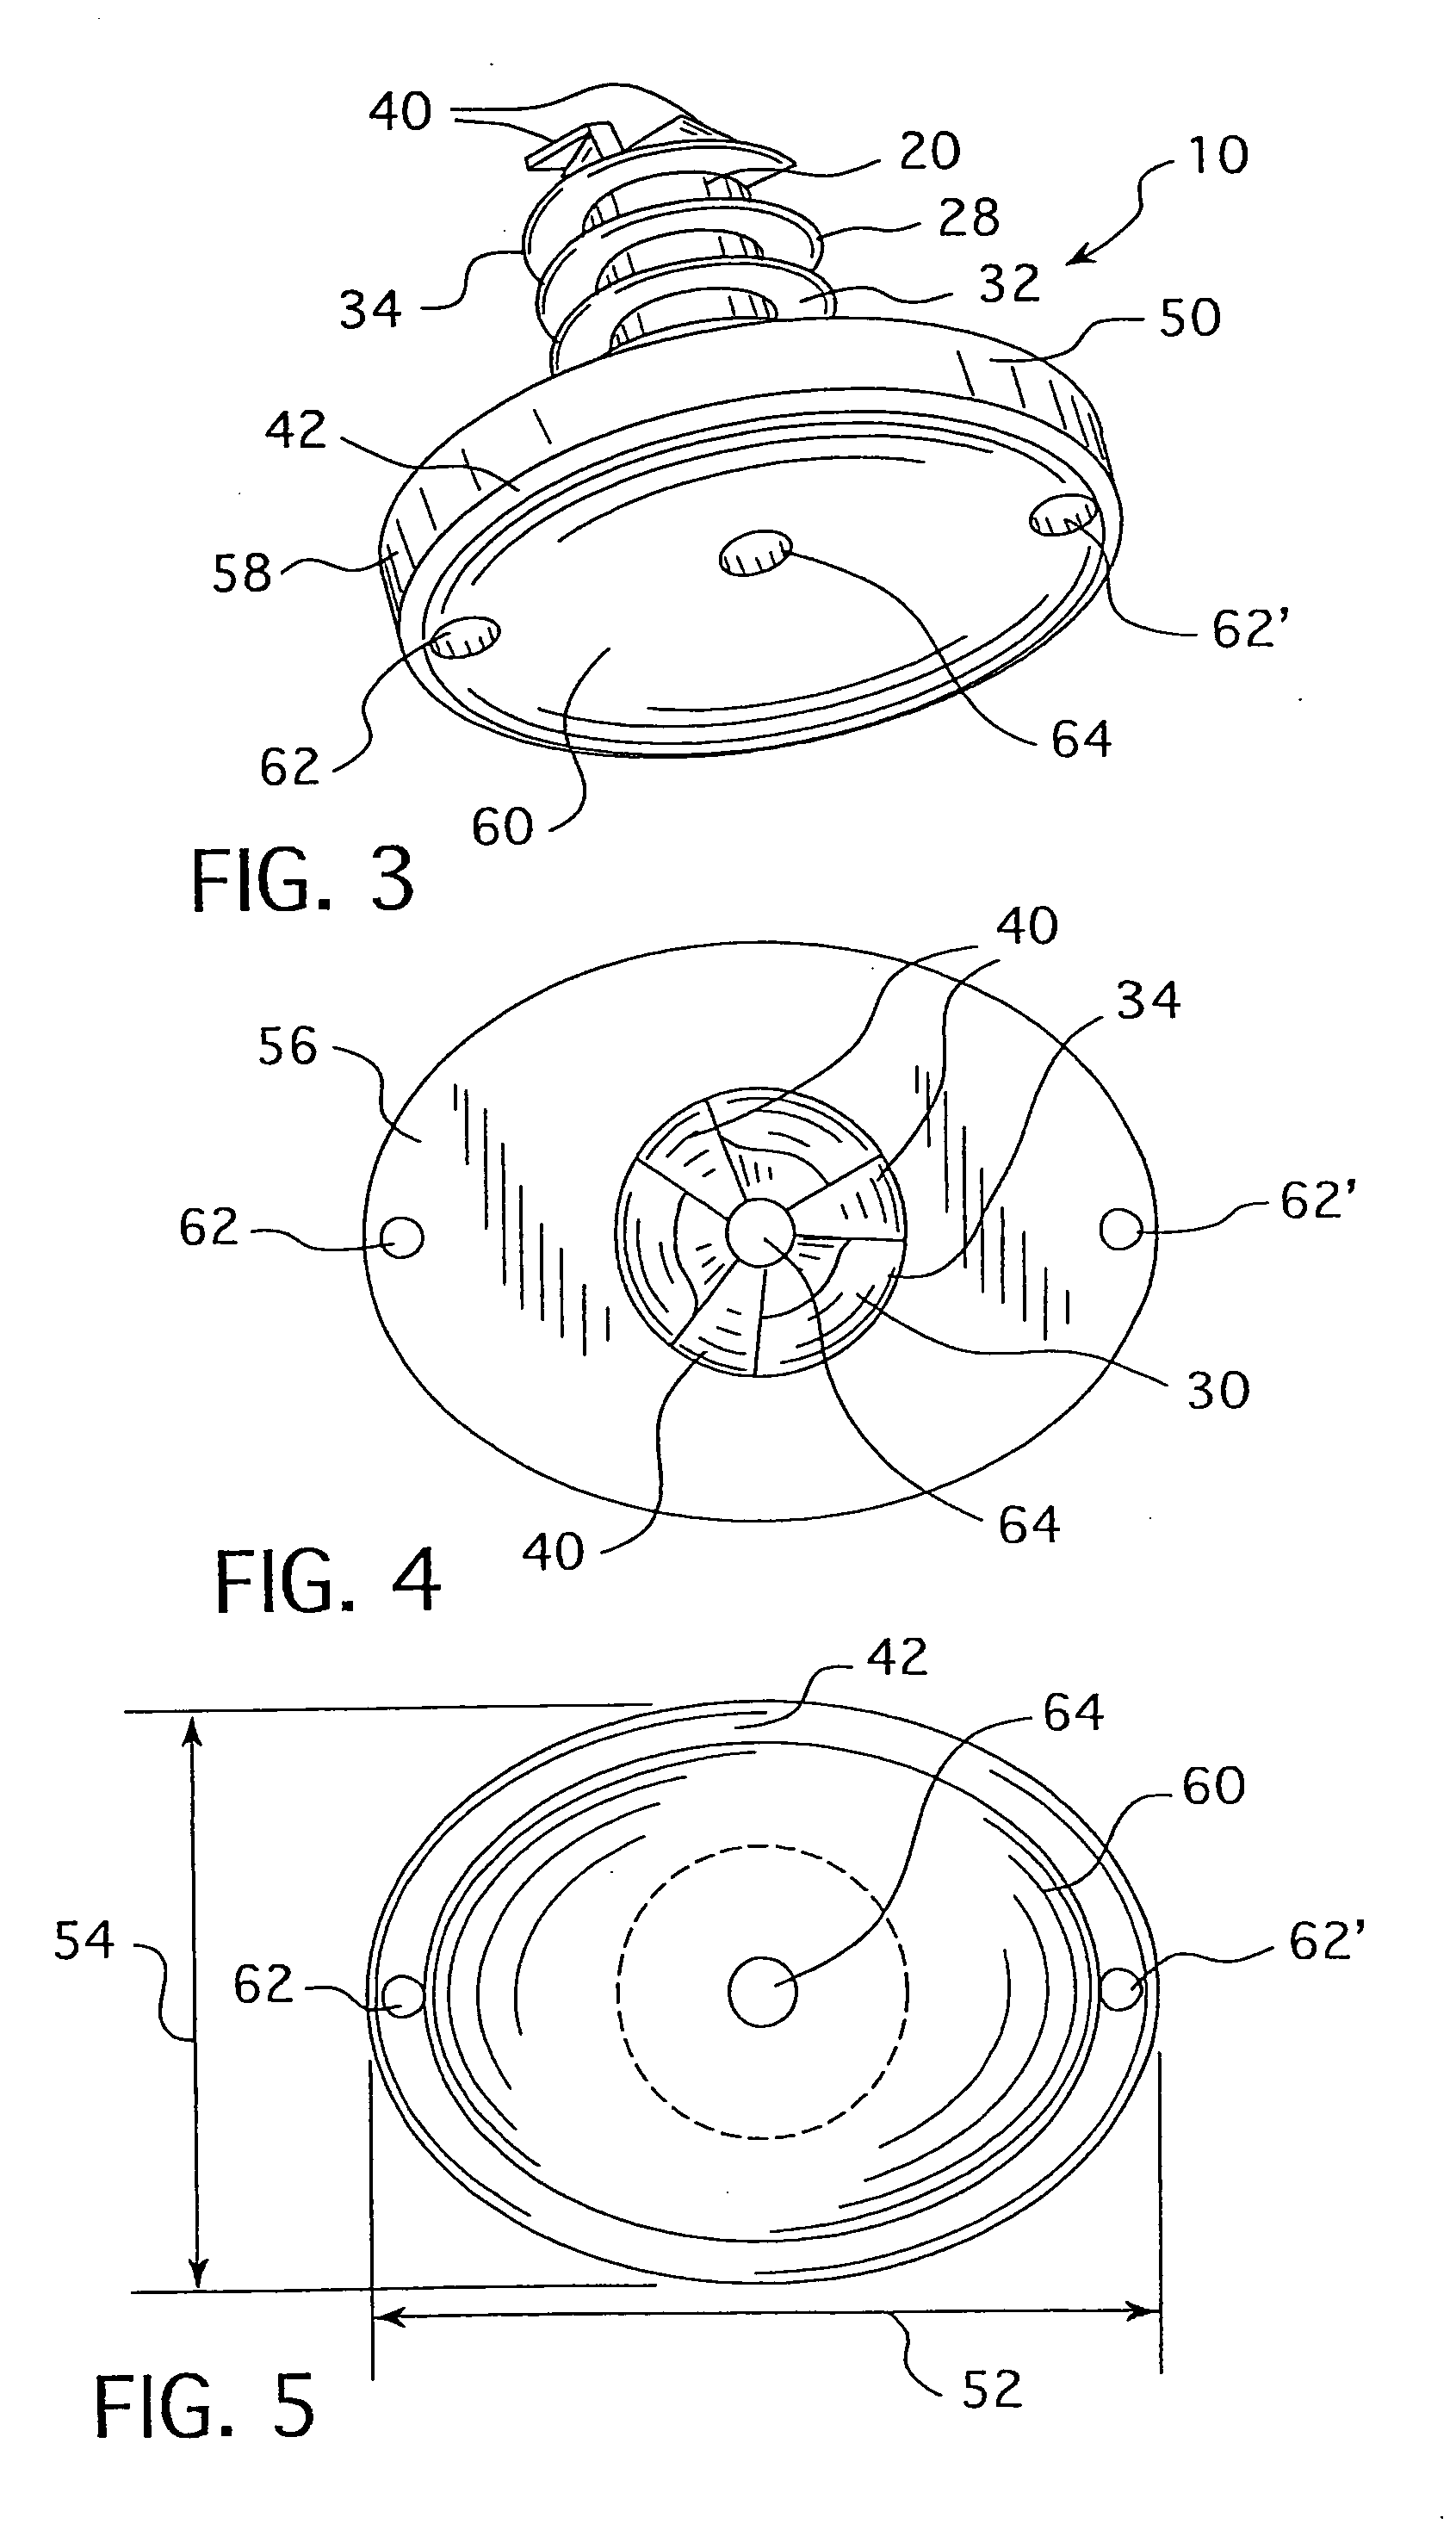 Cannulated hemi-implant and methods of use thereof